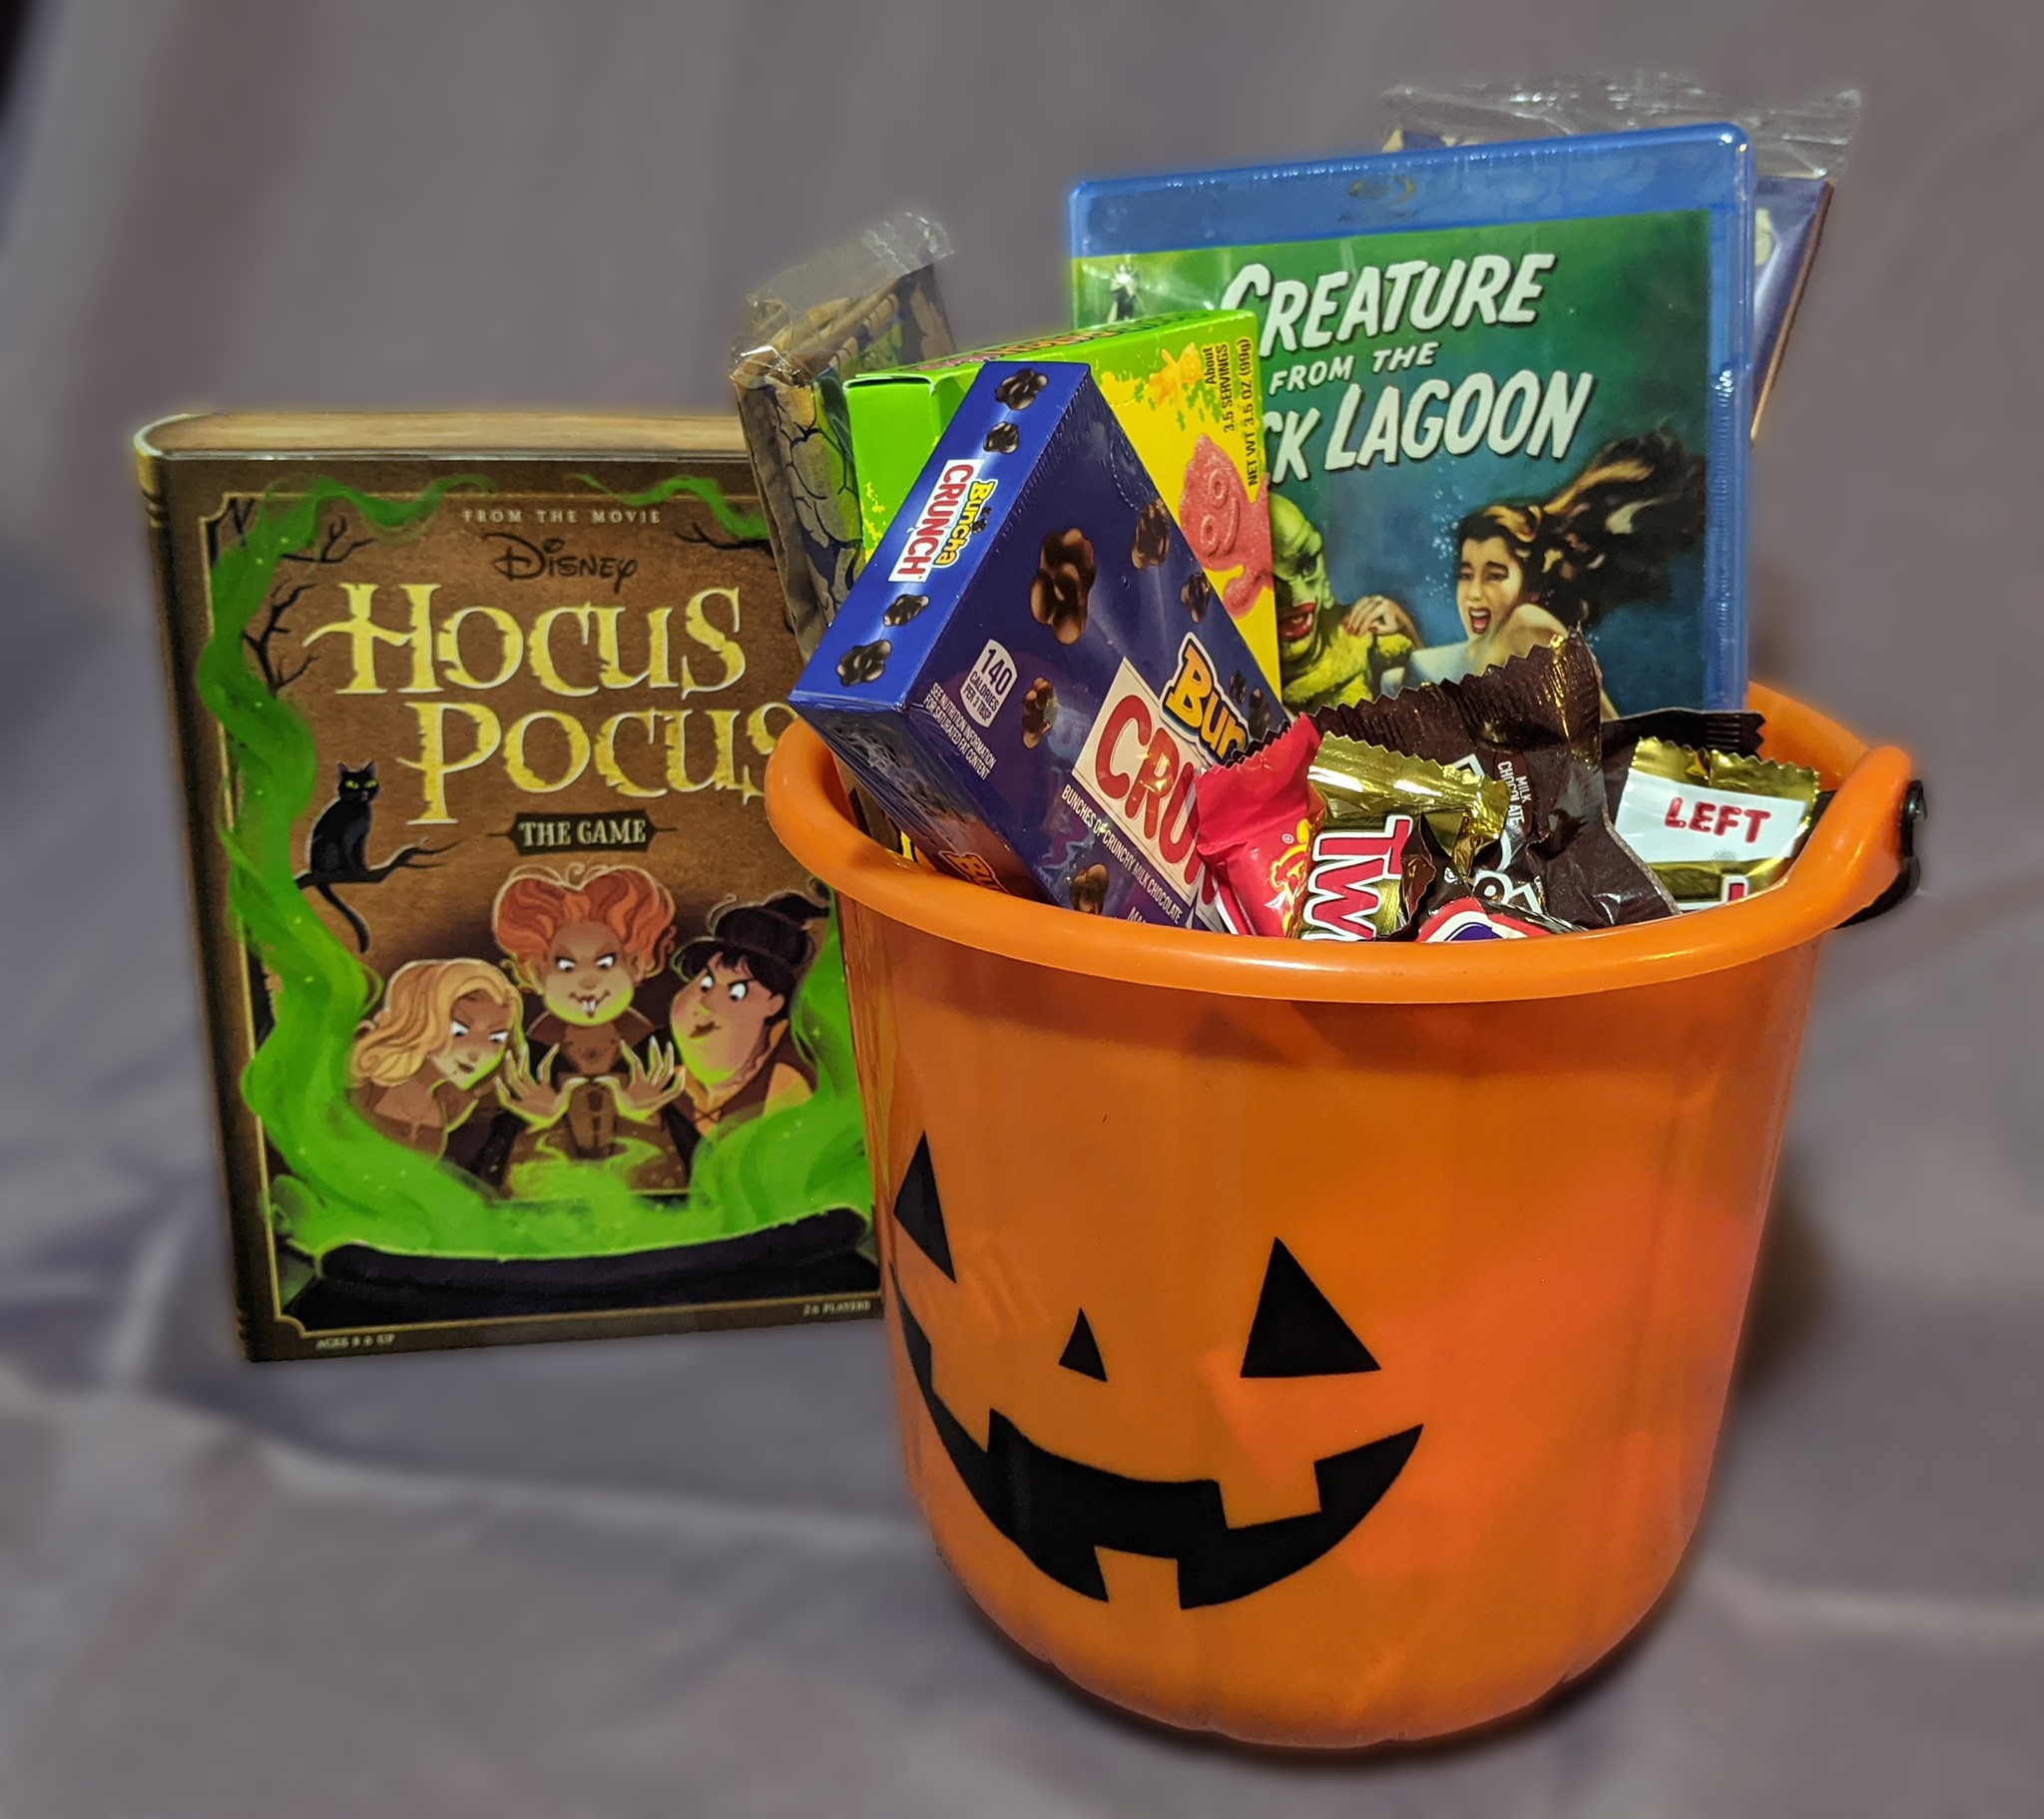 Hocus Pocus the Game and A jack-o-lantern bucket filled with candy, popcorn, and a Creature from the Black Lagoon Blu-ray